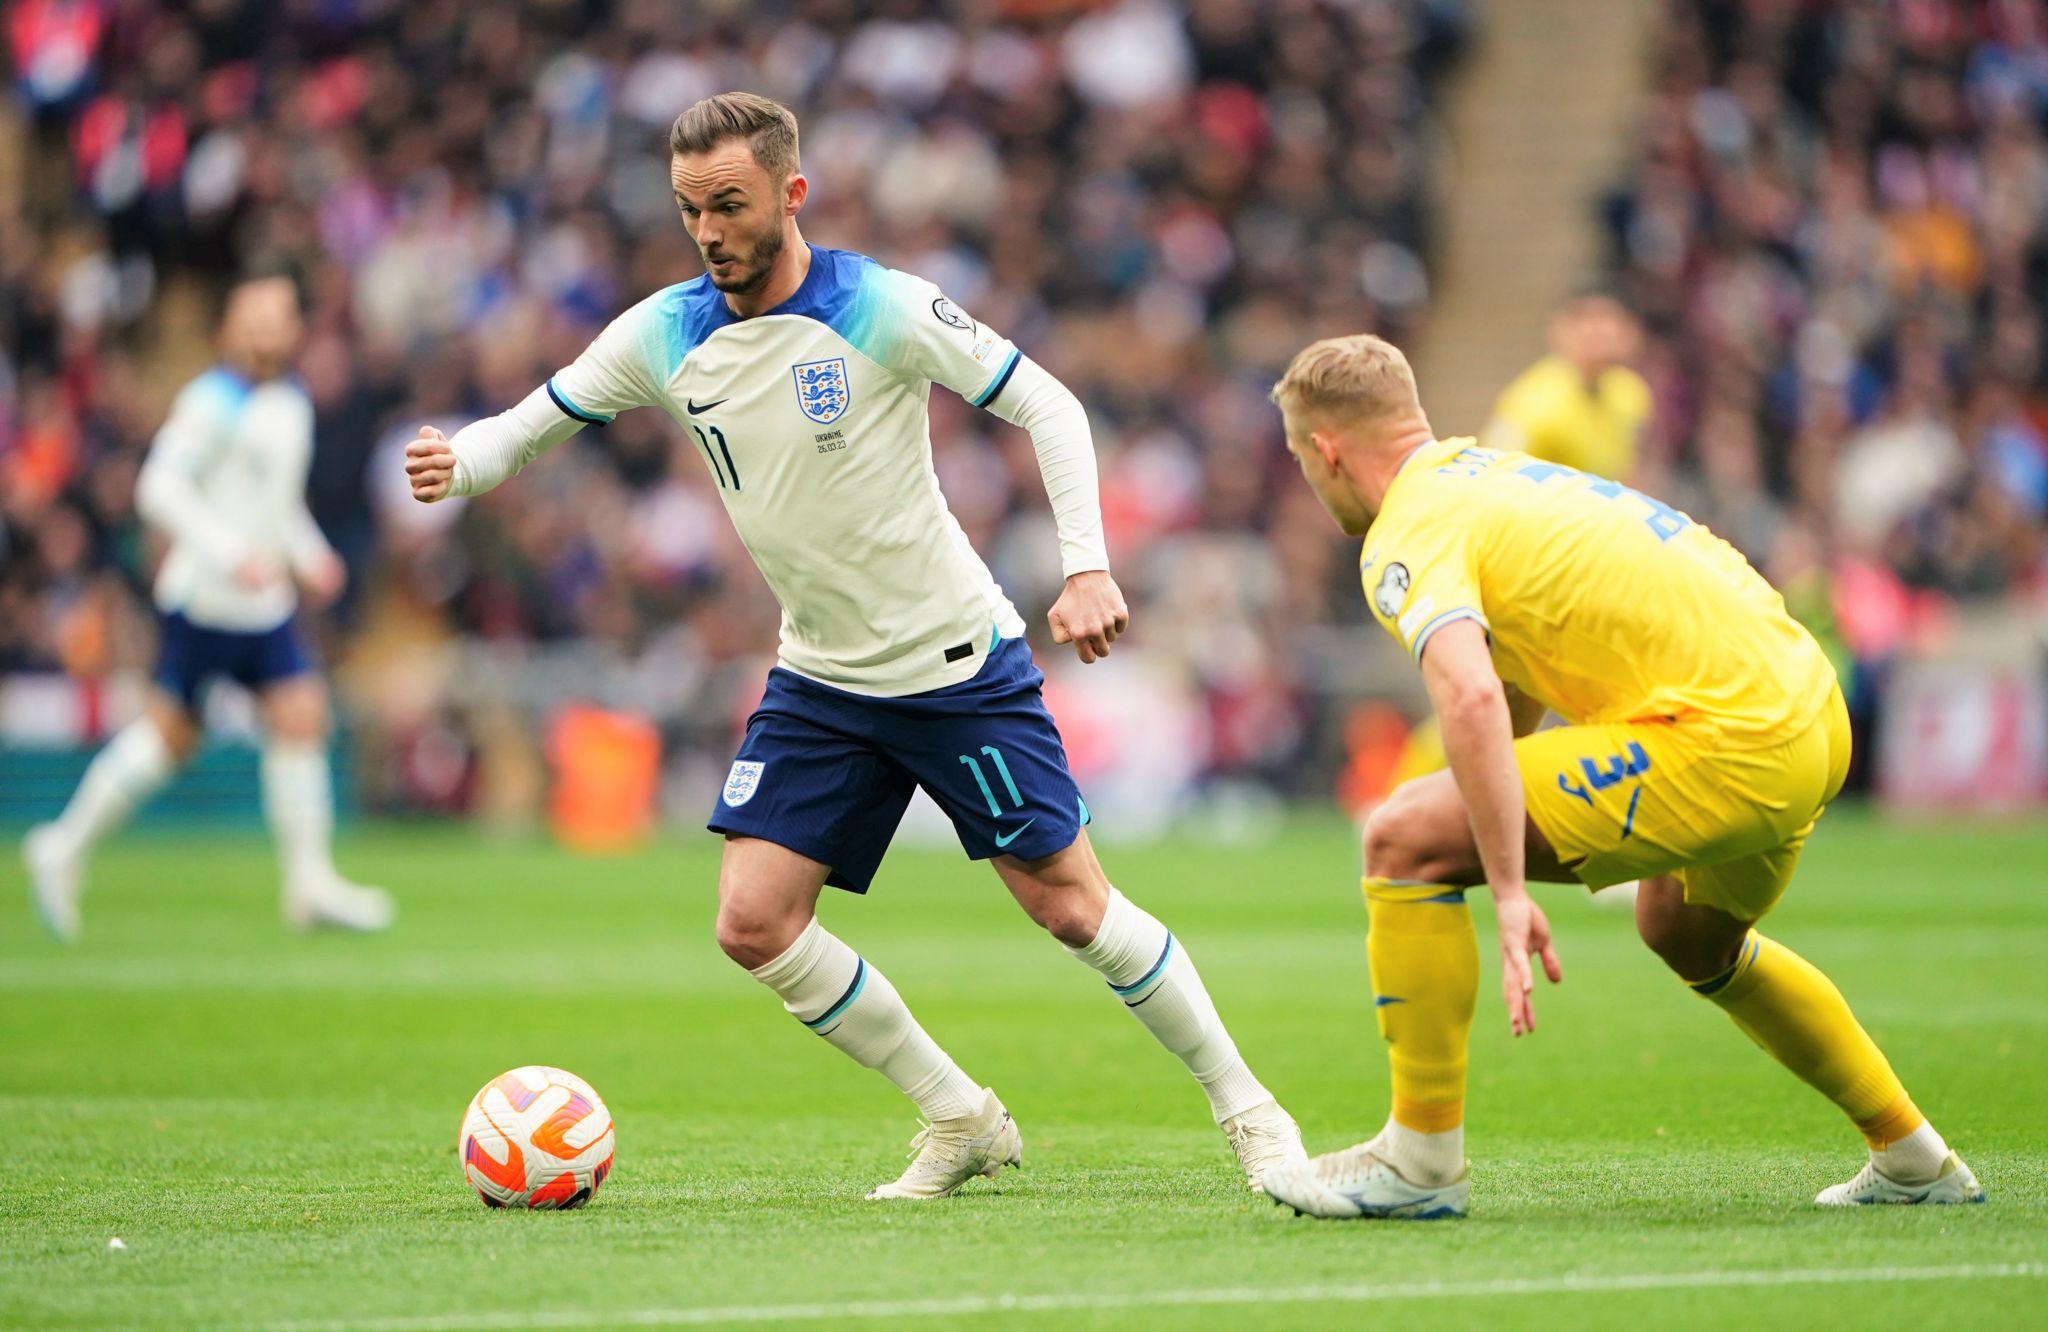 Leicester City: James Maddison thrilled with 'second England debut' - BBC Sport